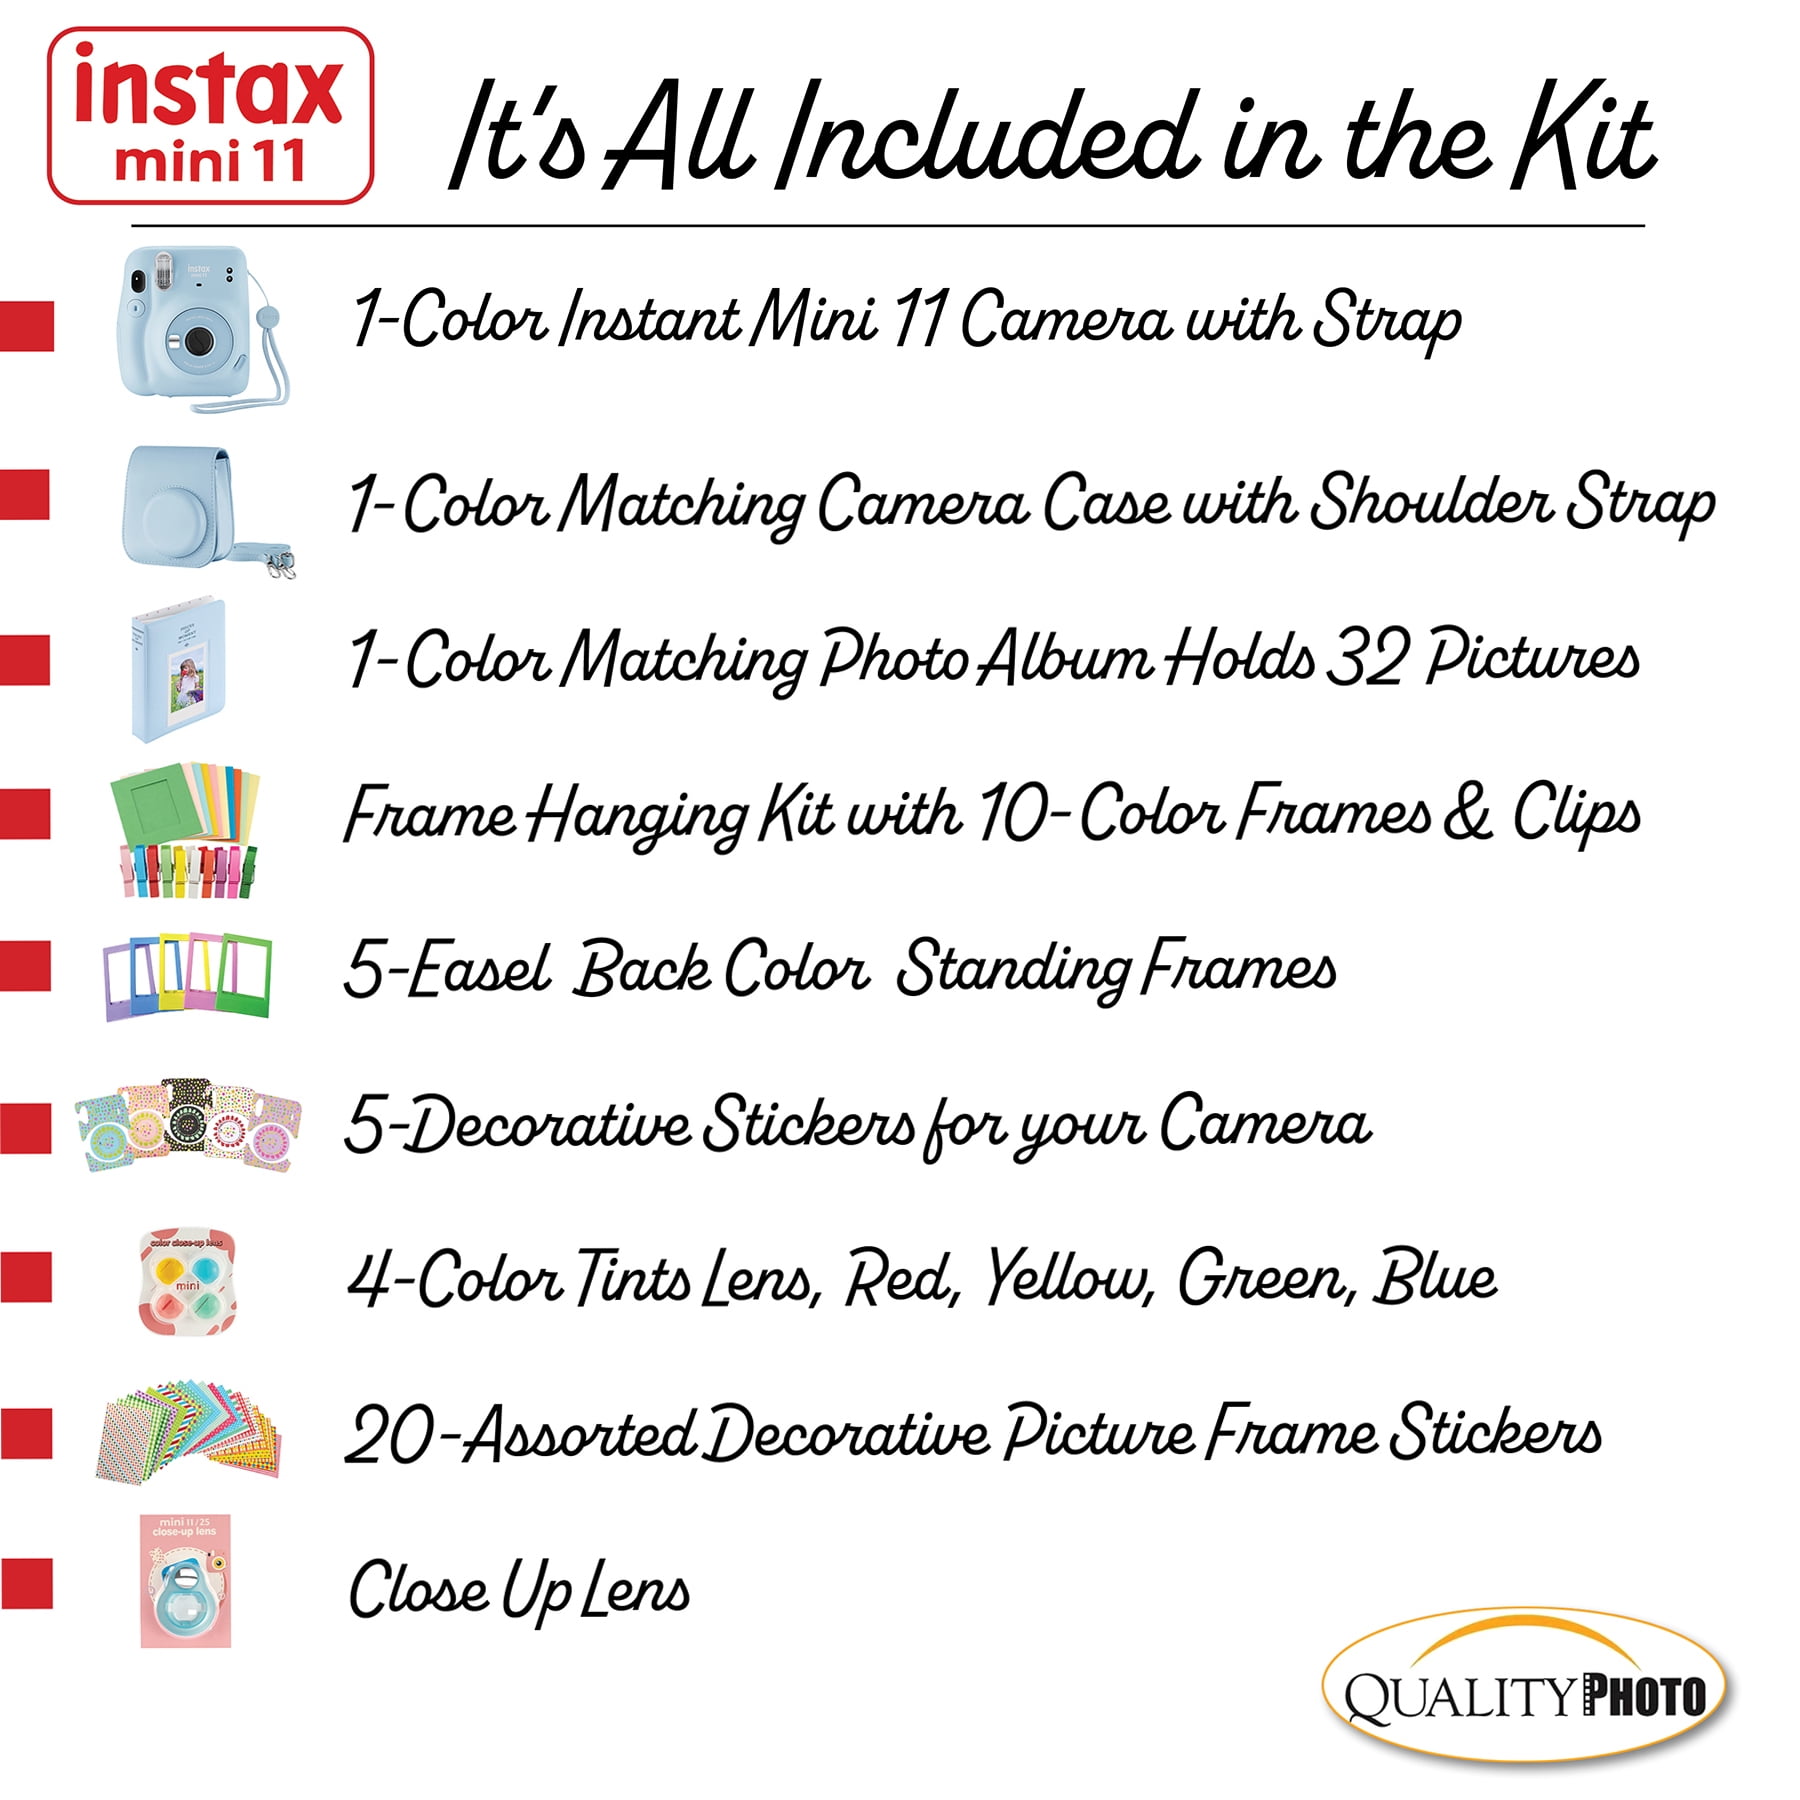 Fujifilm Instax Mini 11 Instant Camera (Ice White) with Case, Decoration  Stickers, Frames, Photo Album and more Accessory kit